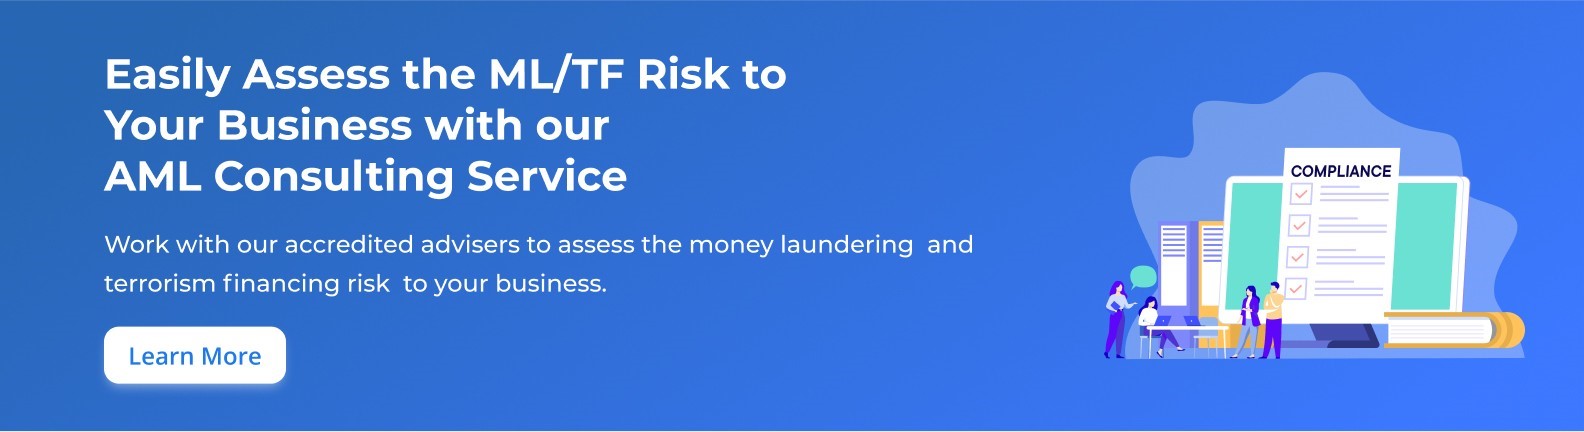 Easily Assess the ML/TF Risk to Your Business with our AML Risk Assessment Consulting Service